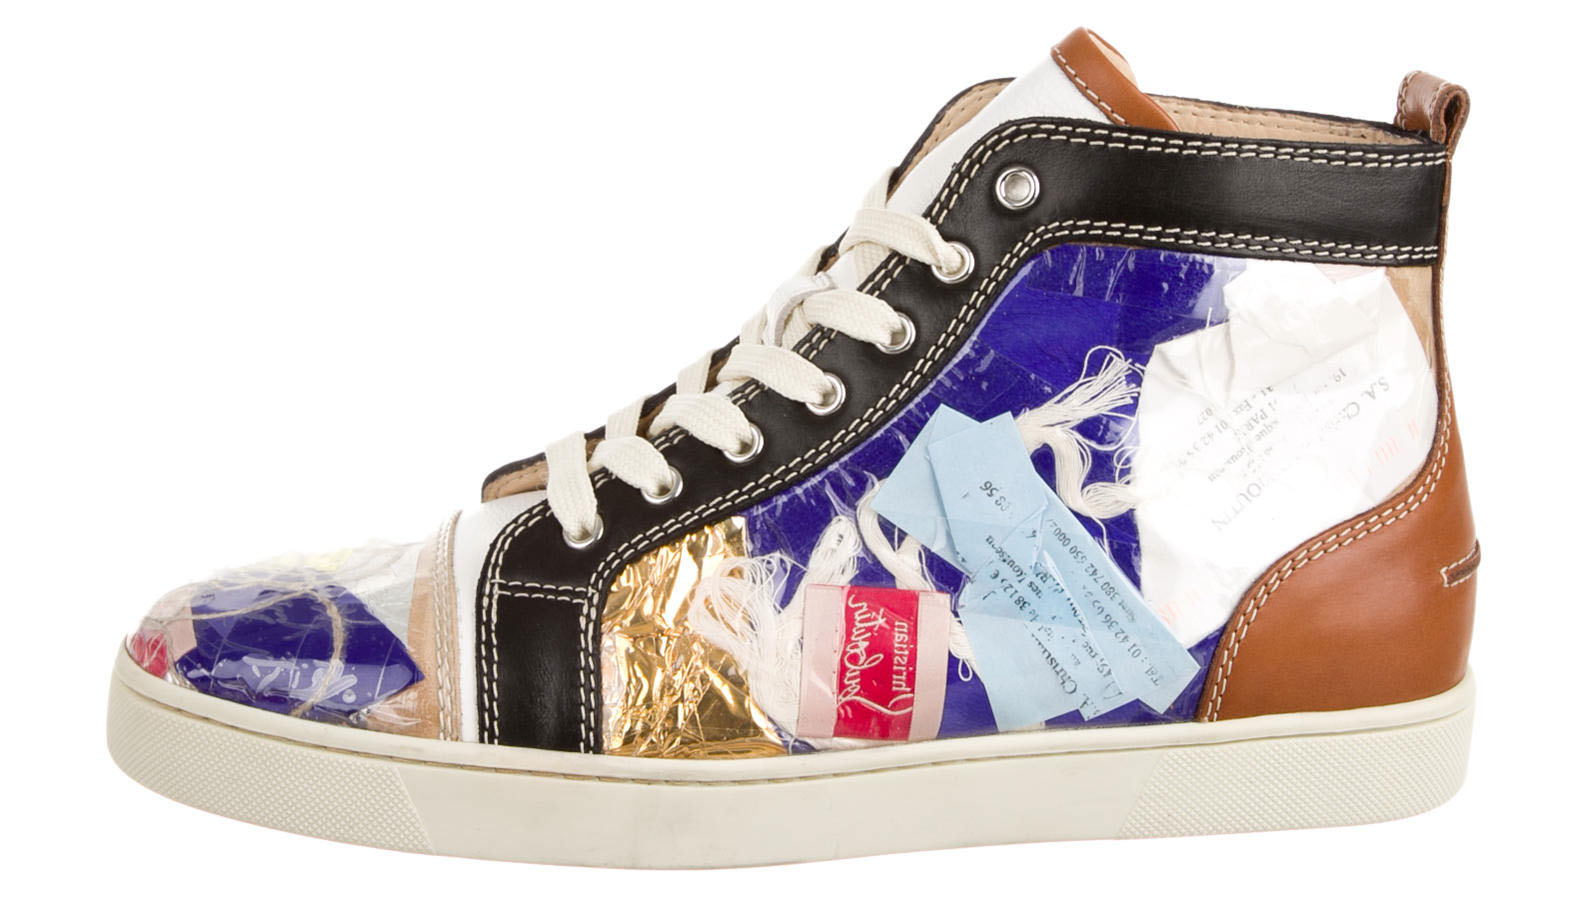 These Christian Louboutin Sneakers Are Trash | Complex